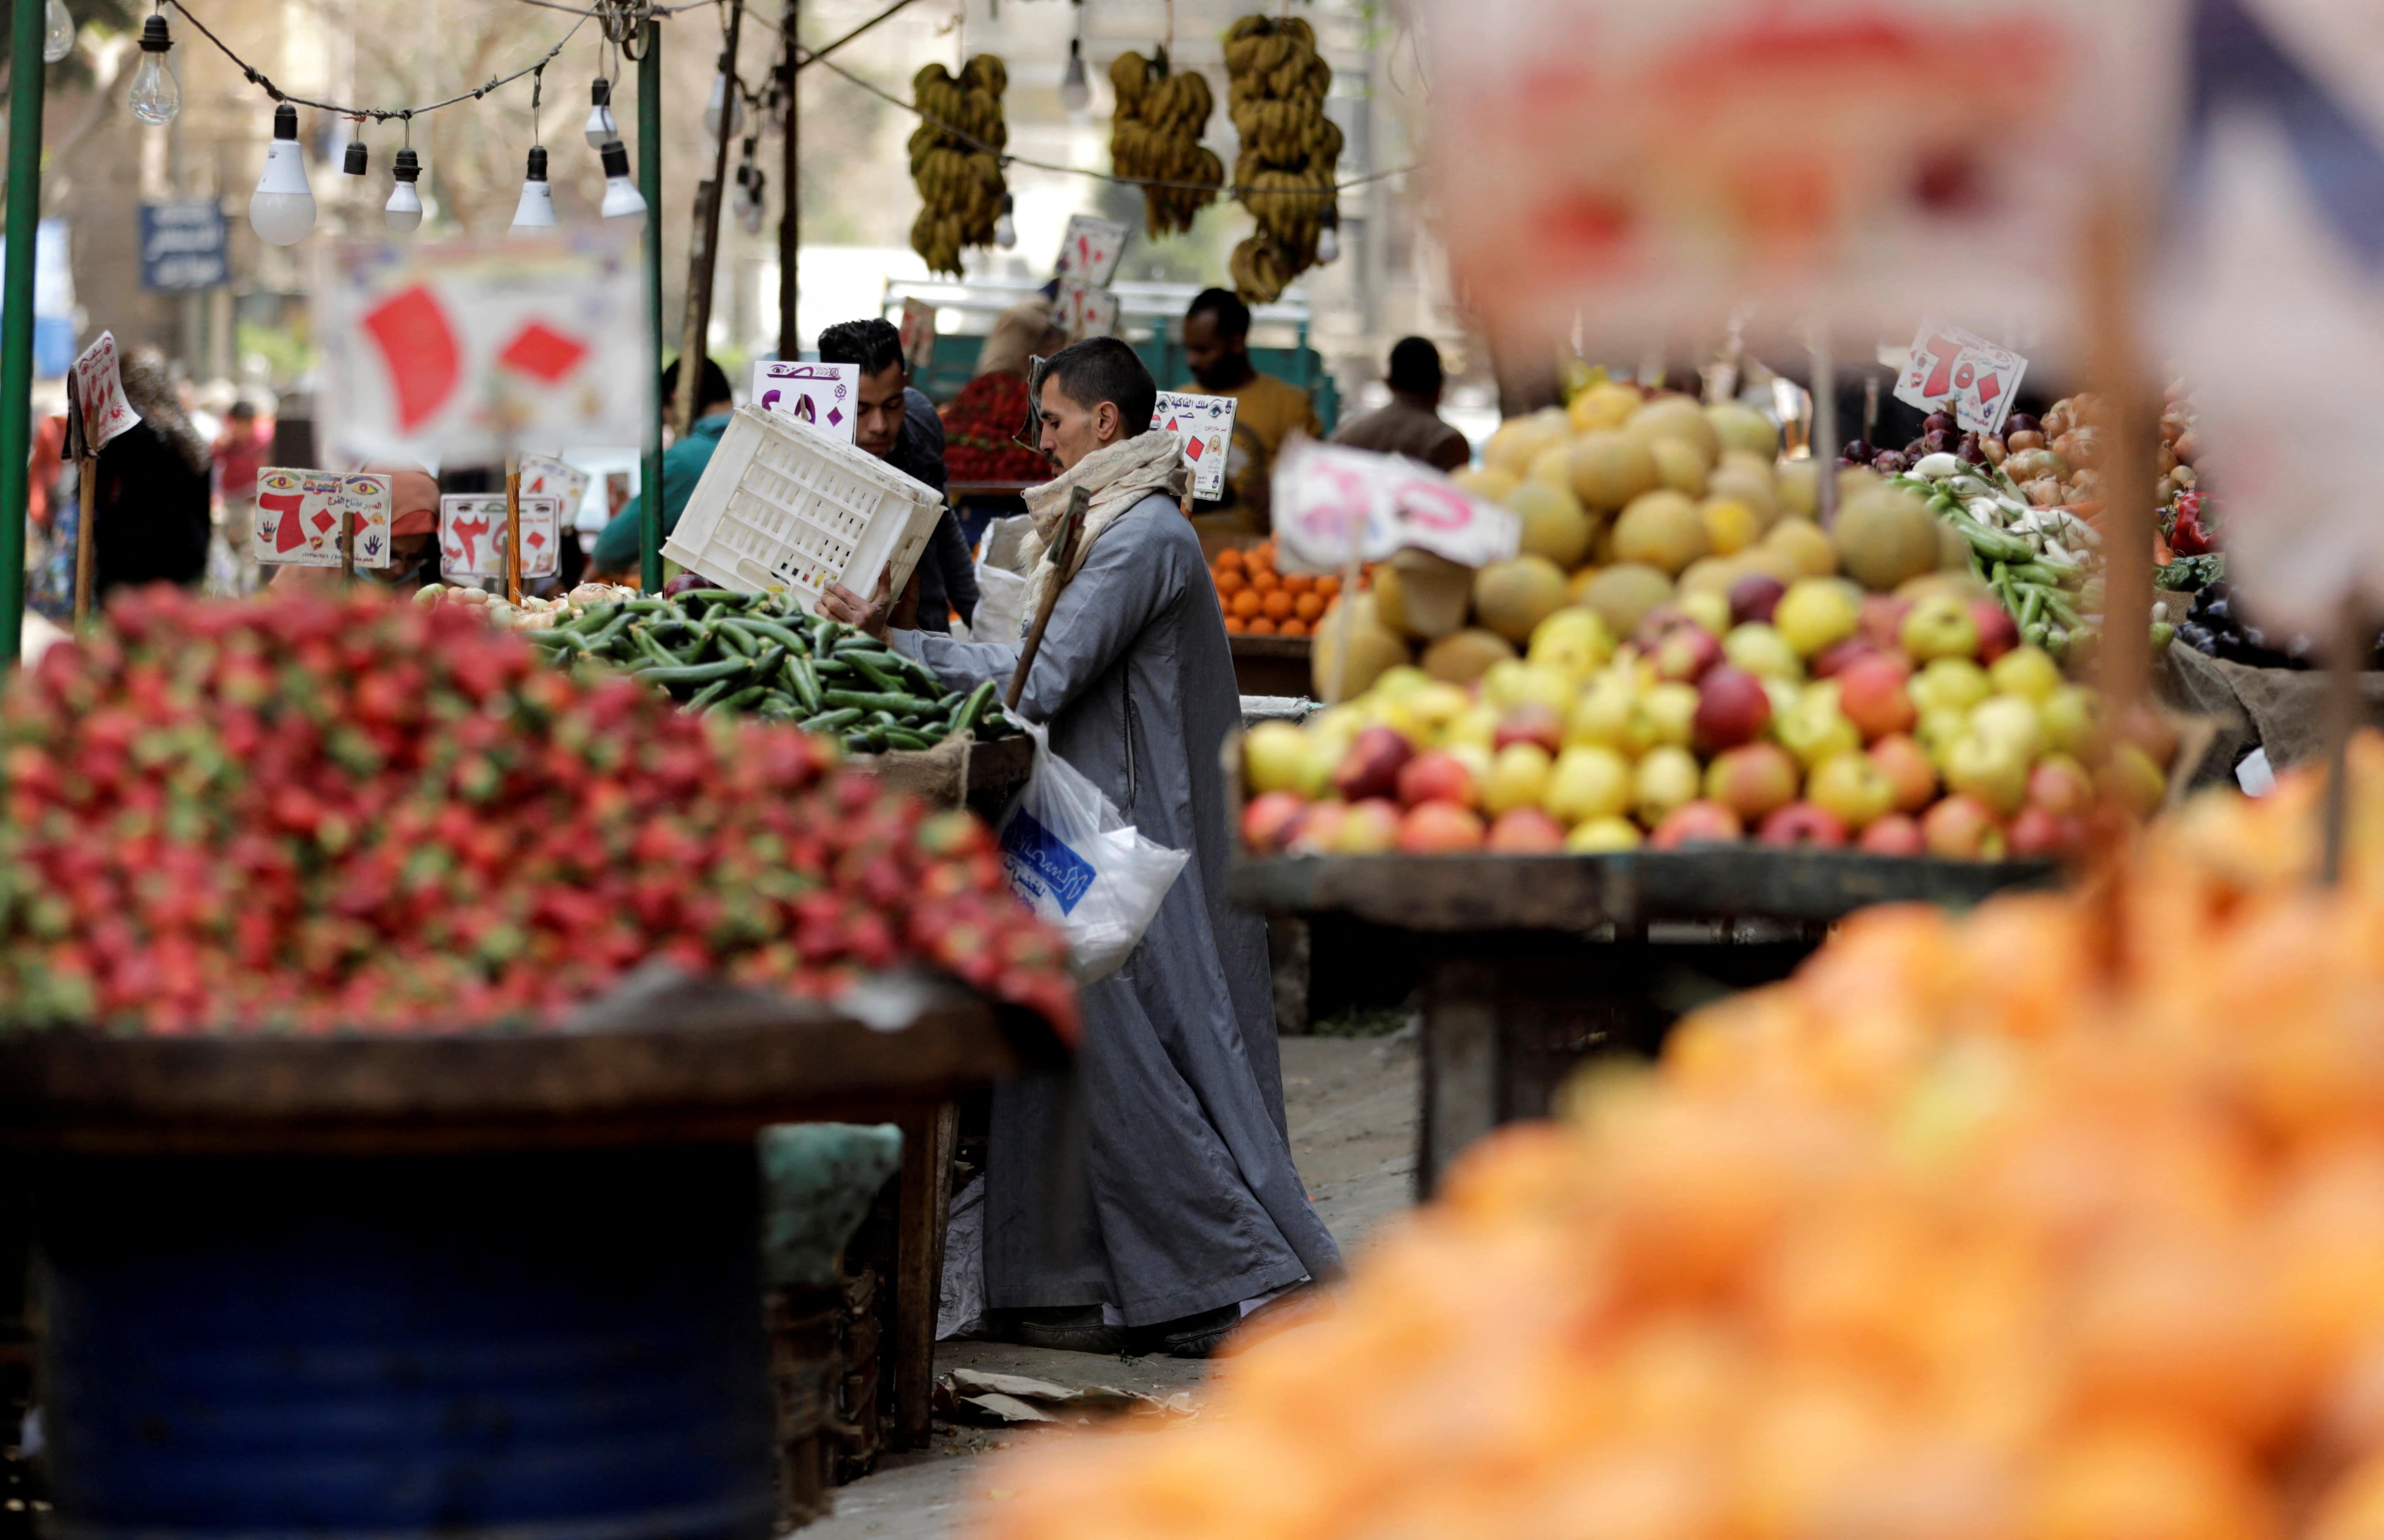 Vendors work at a vegetable market in Cairo, Egypt 22 March 2022. (Reutres)